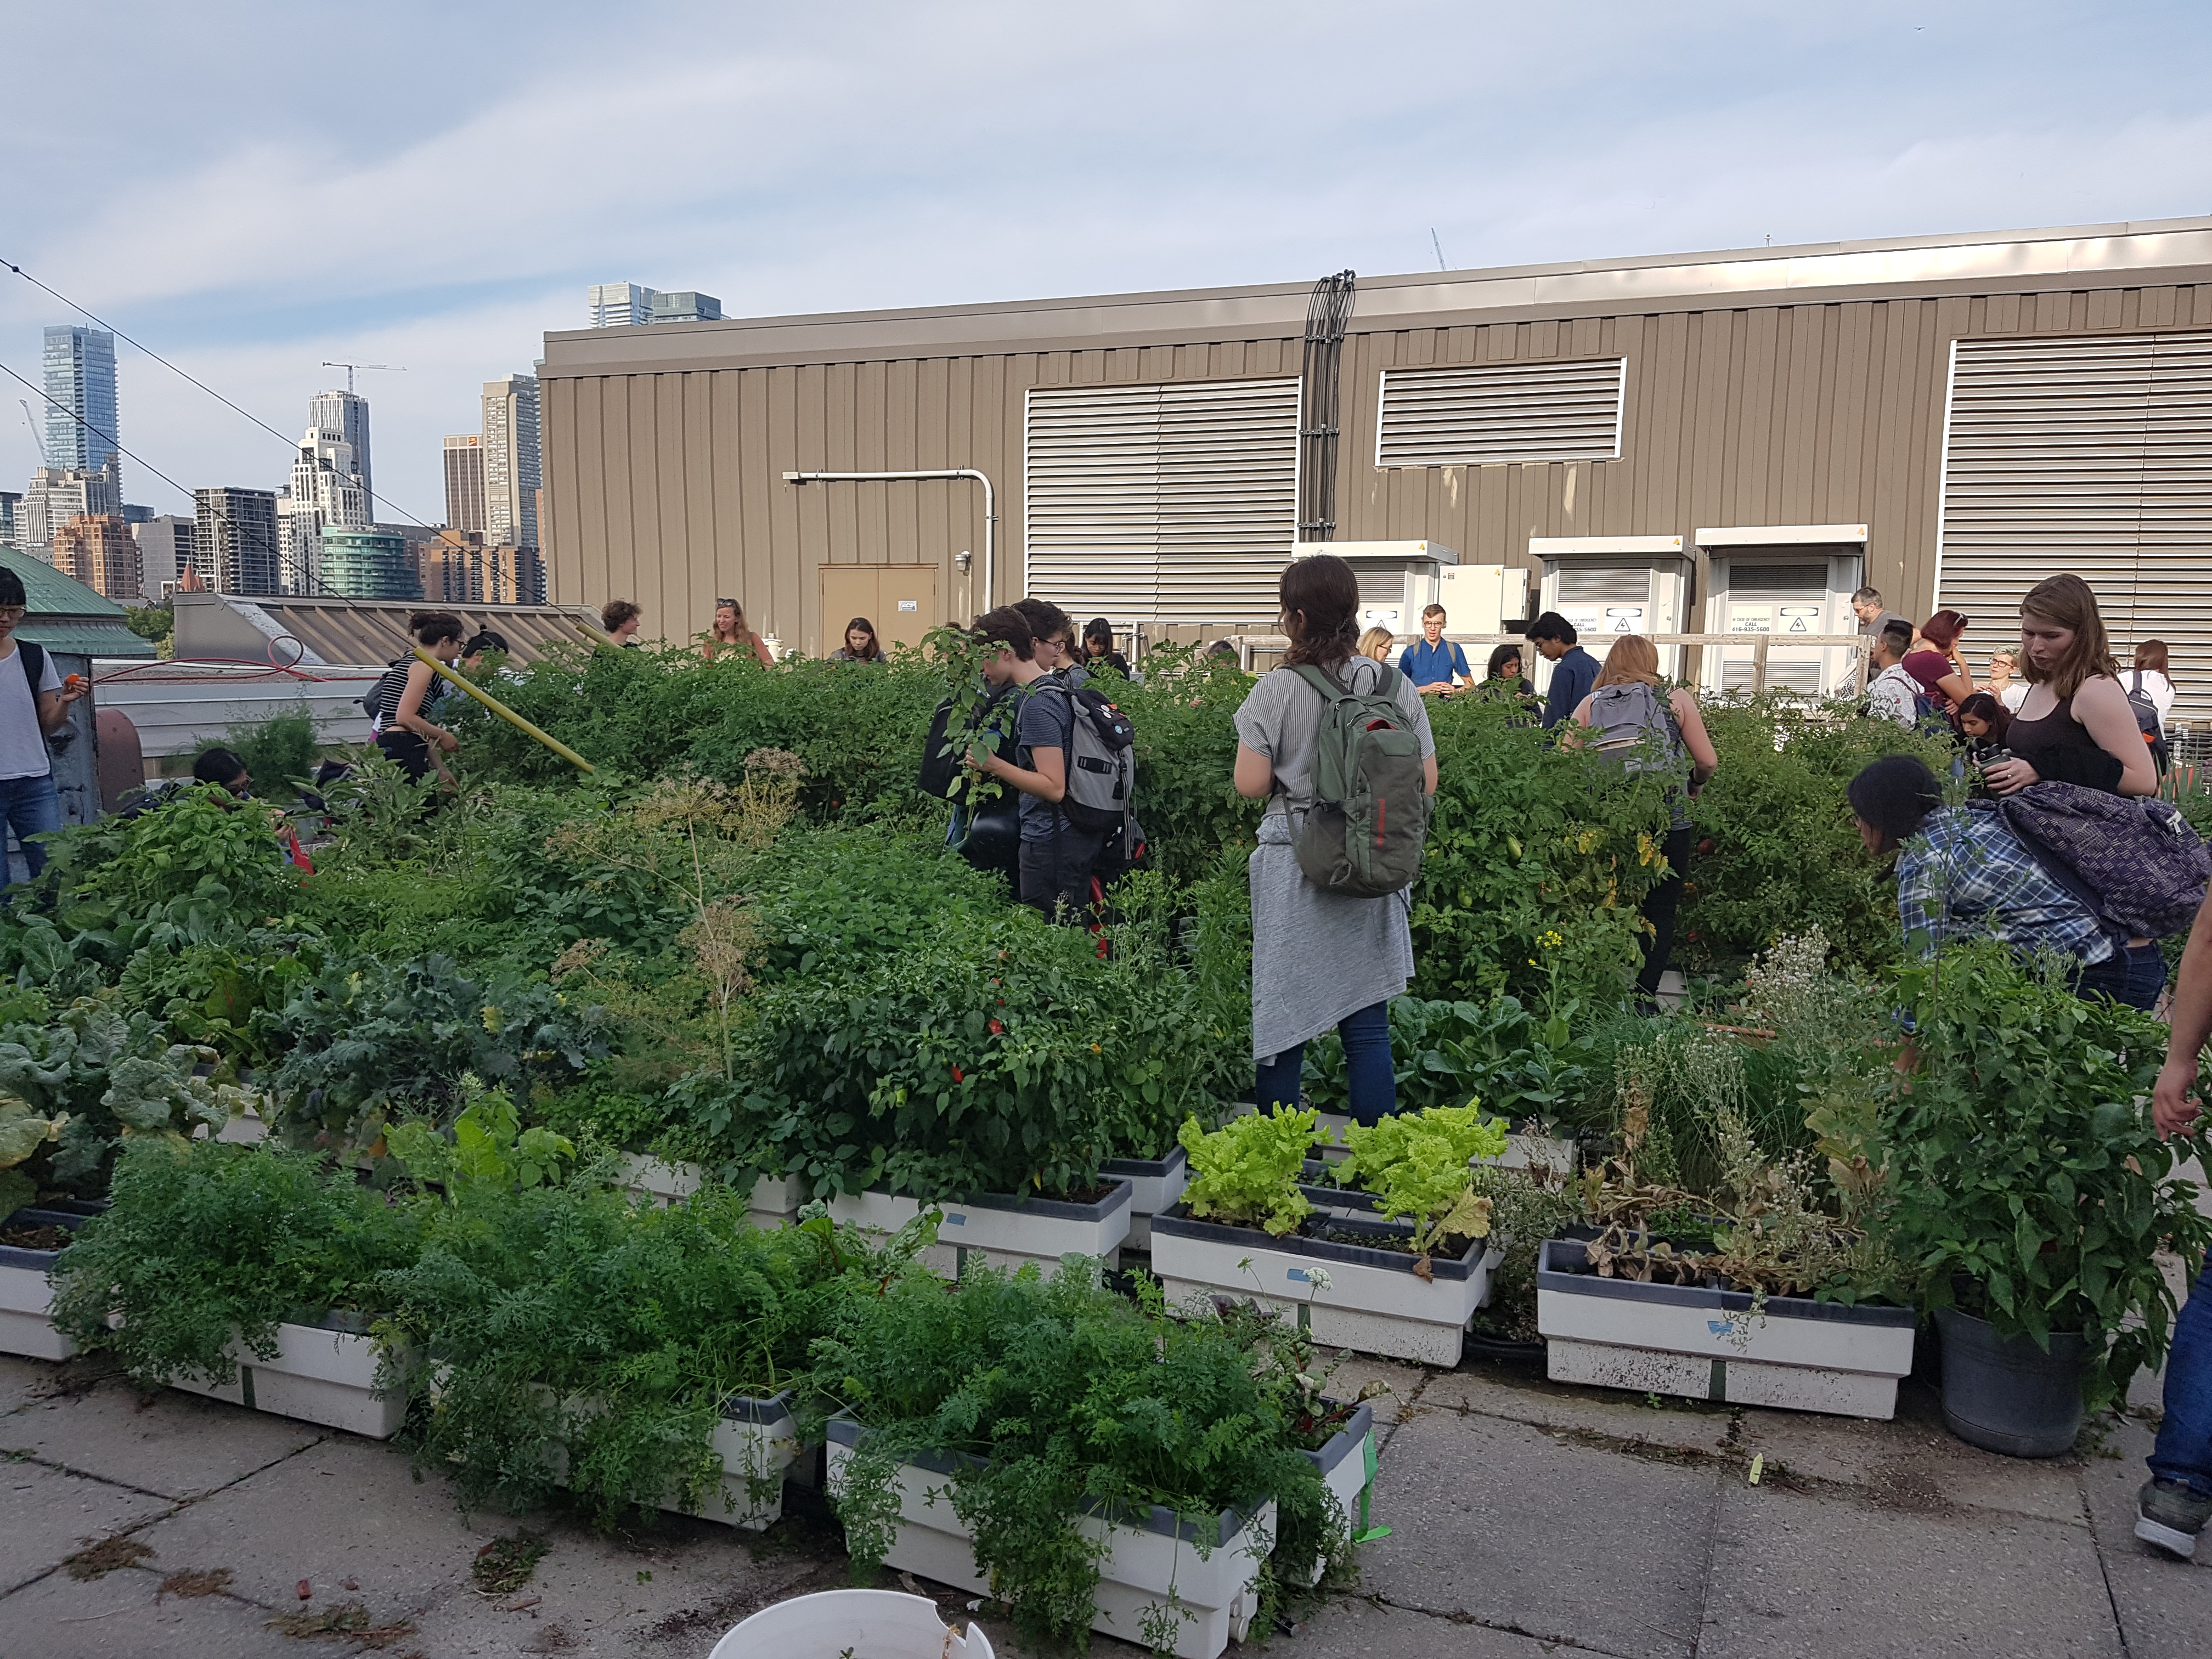 Photo by Ivan Emke. A crowd of people standing among rows of planters on a roof top